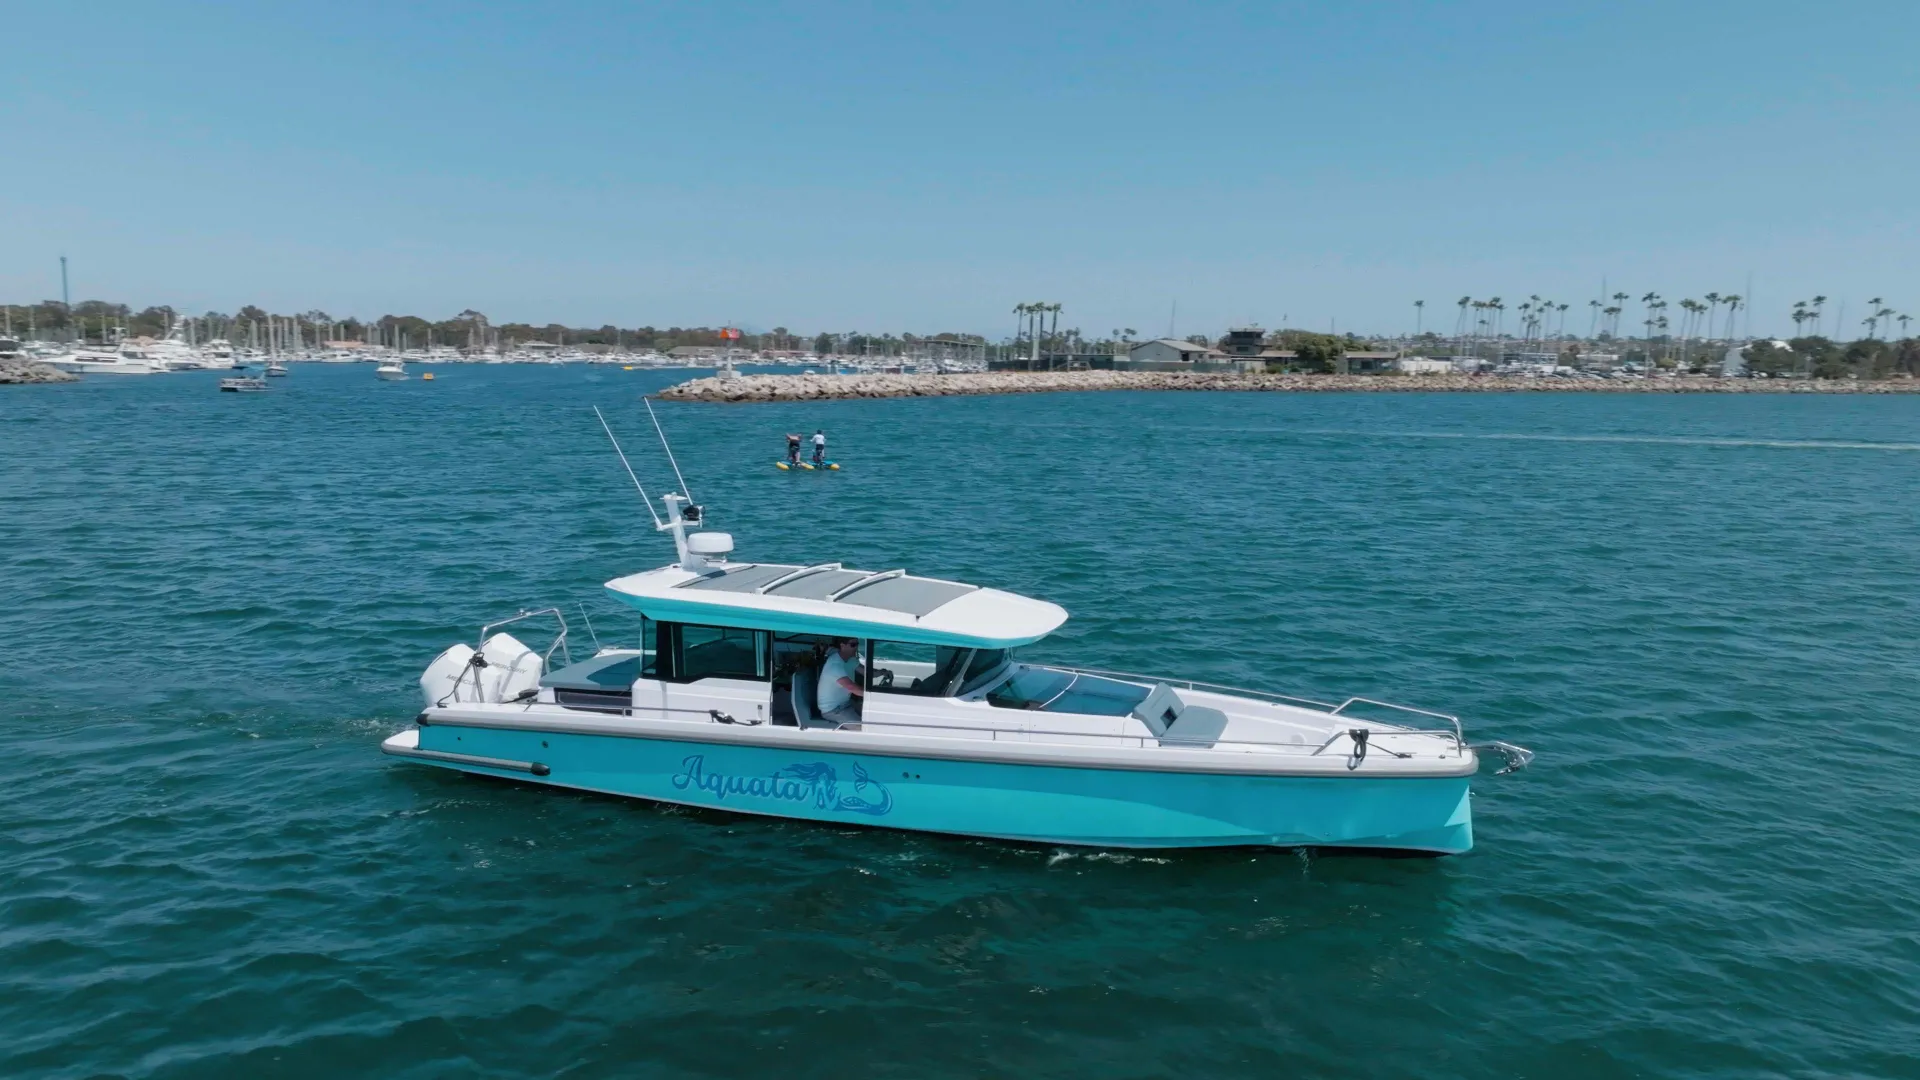 aquata charters in mission bay